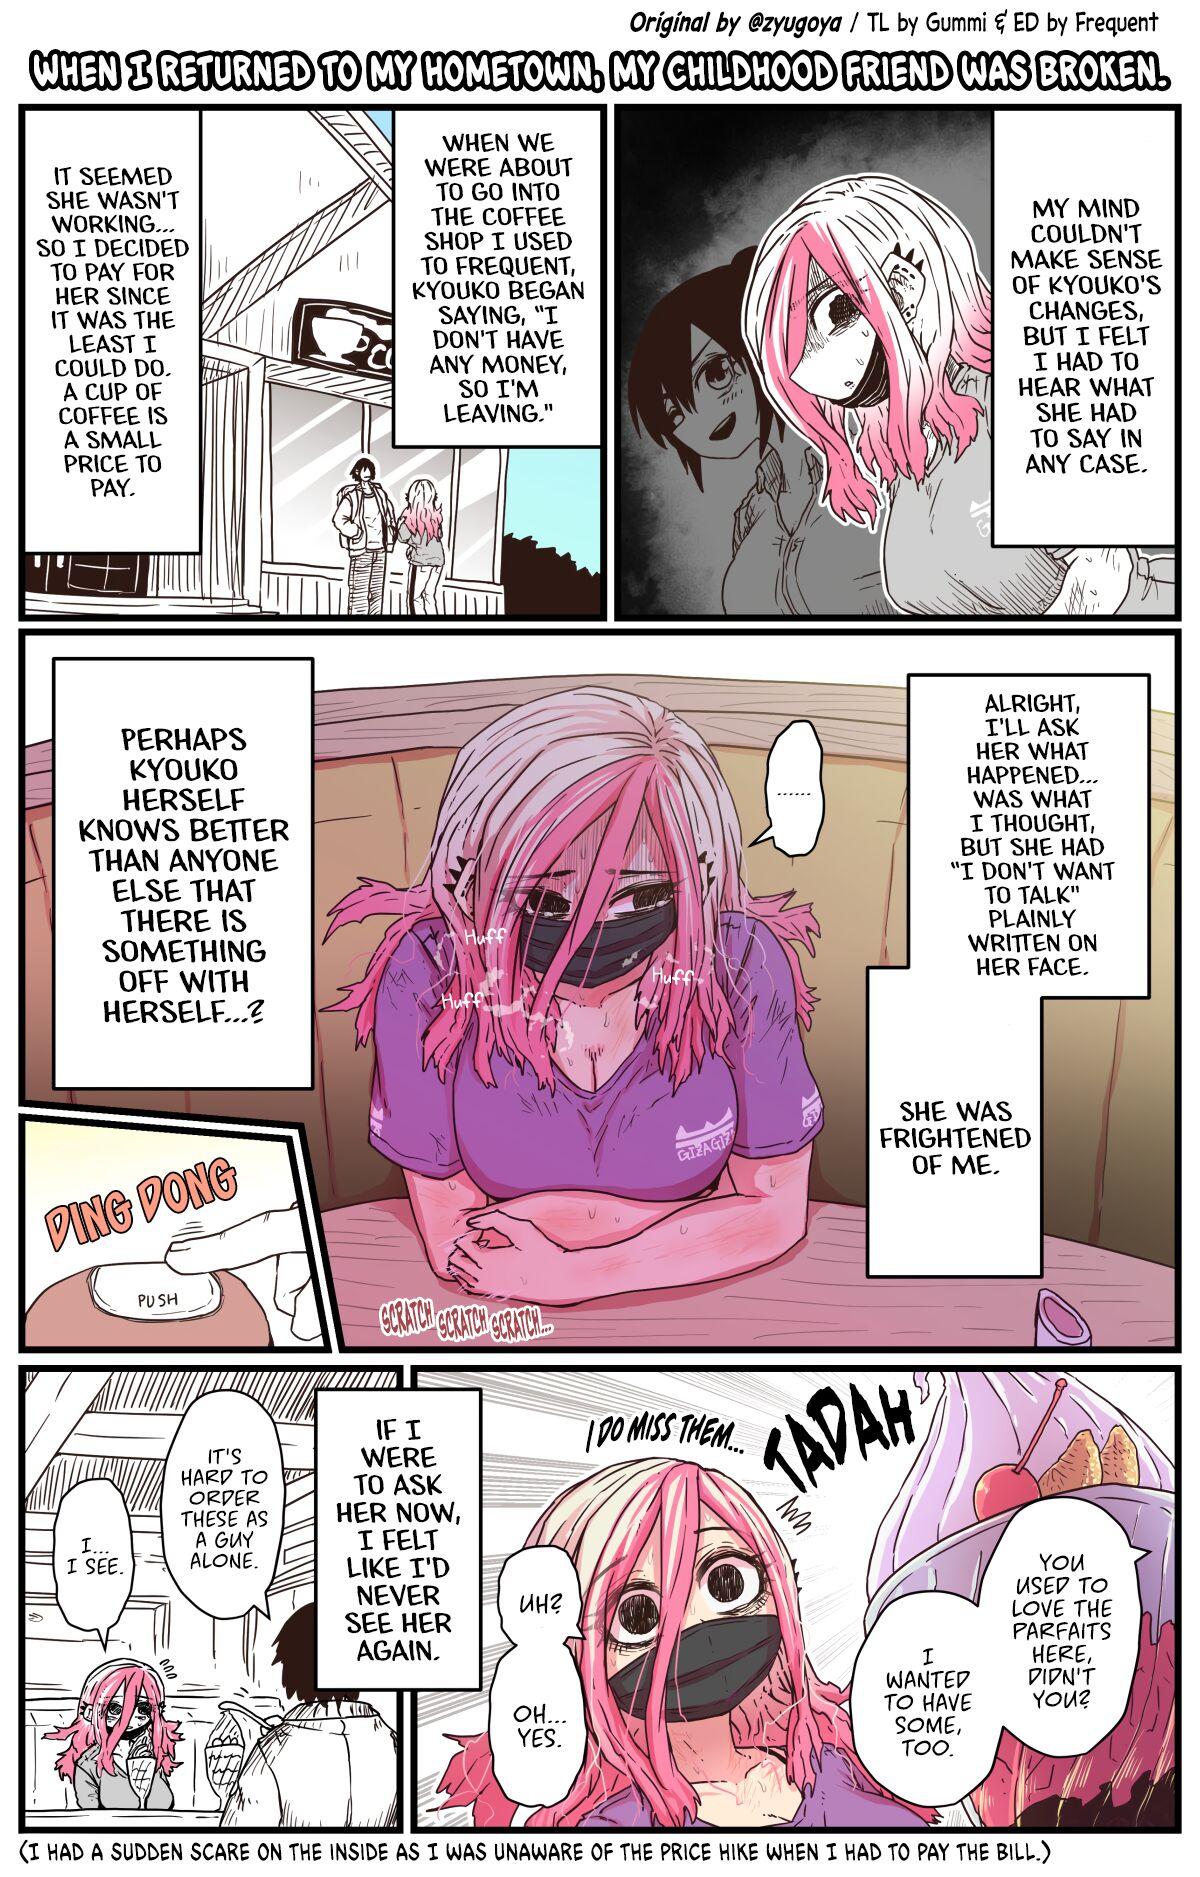 Indonesian When I Returned to My Hometown, My Childhood Friend was Broken - Original Cums - Page 4